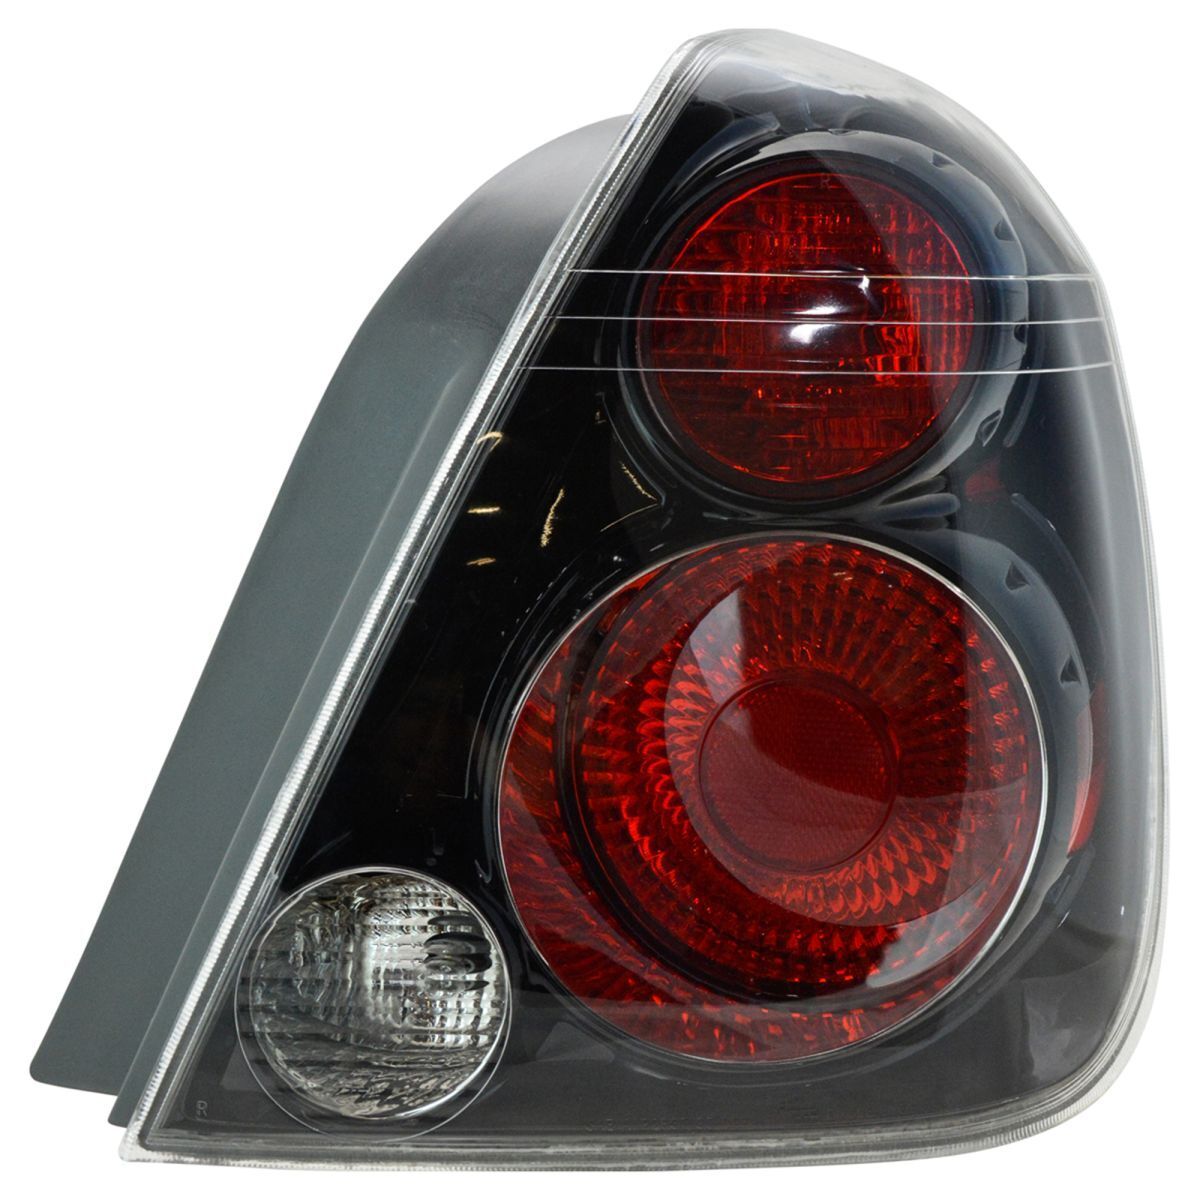 Taillights Taillamps Brake Lights Left & Right Pair Set for 05